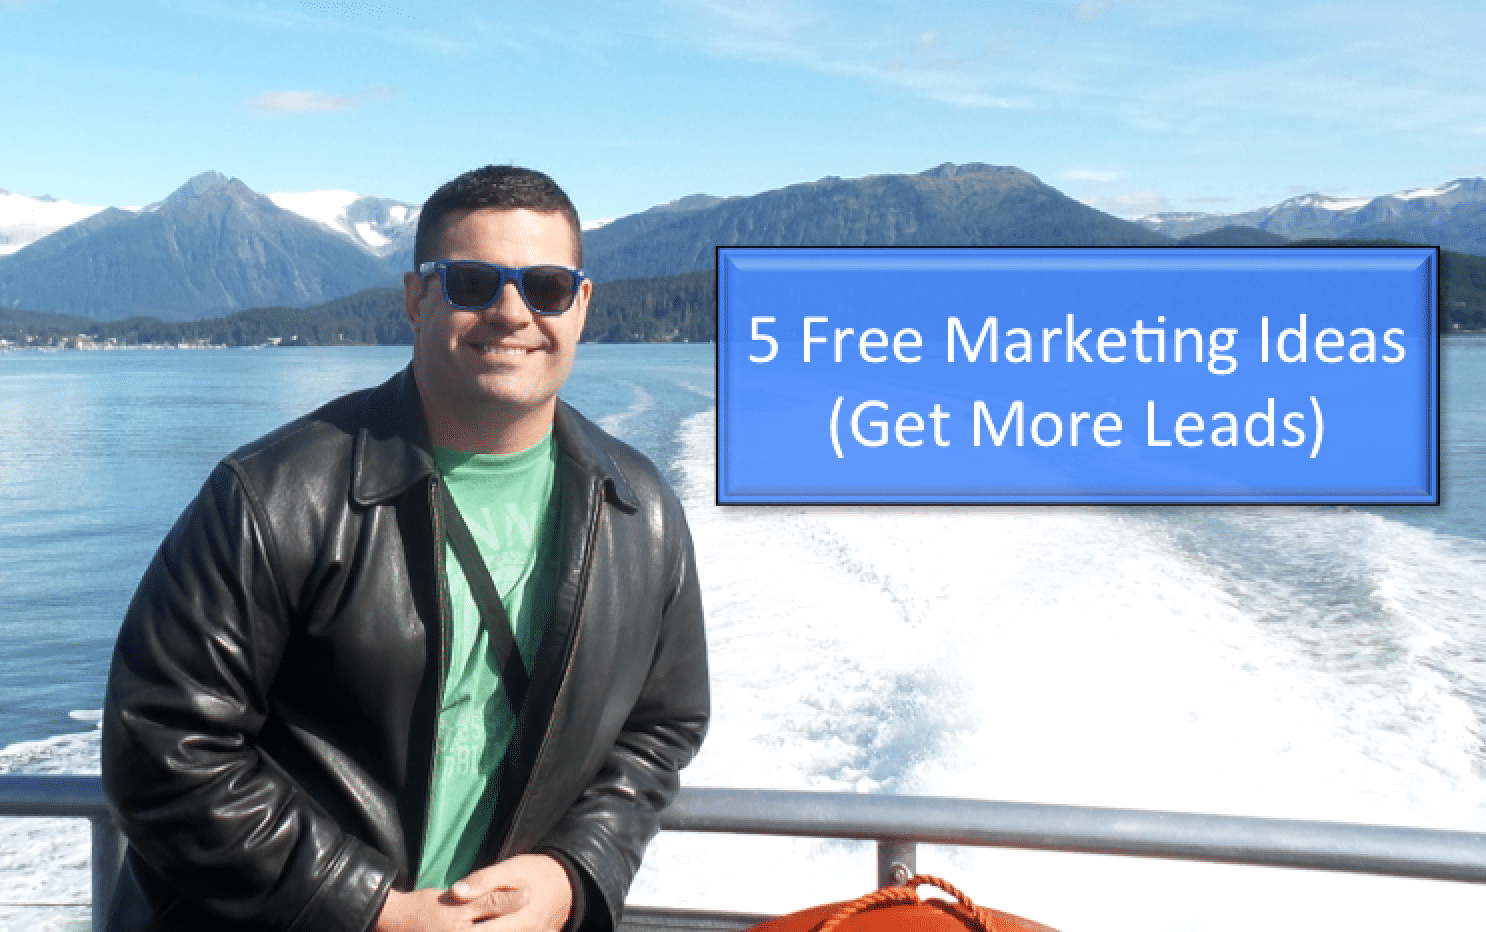 5 Free Marketing Ideas to Get Leads